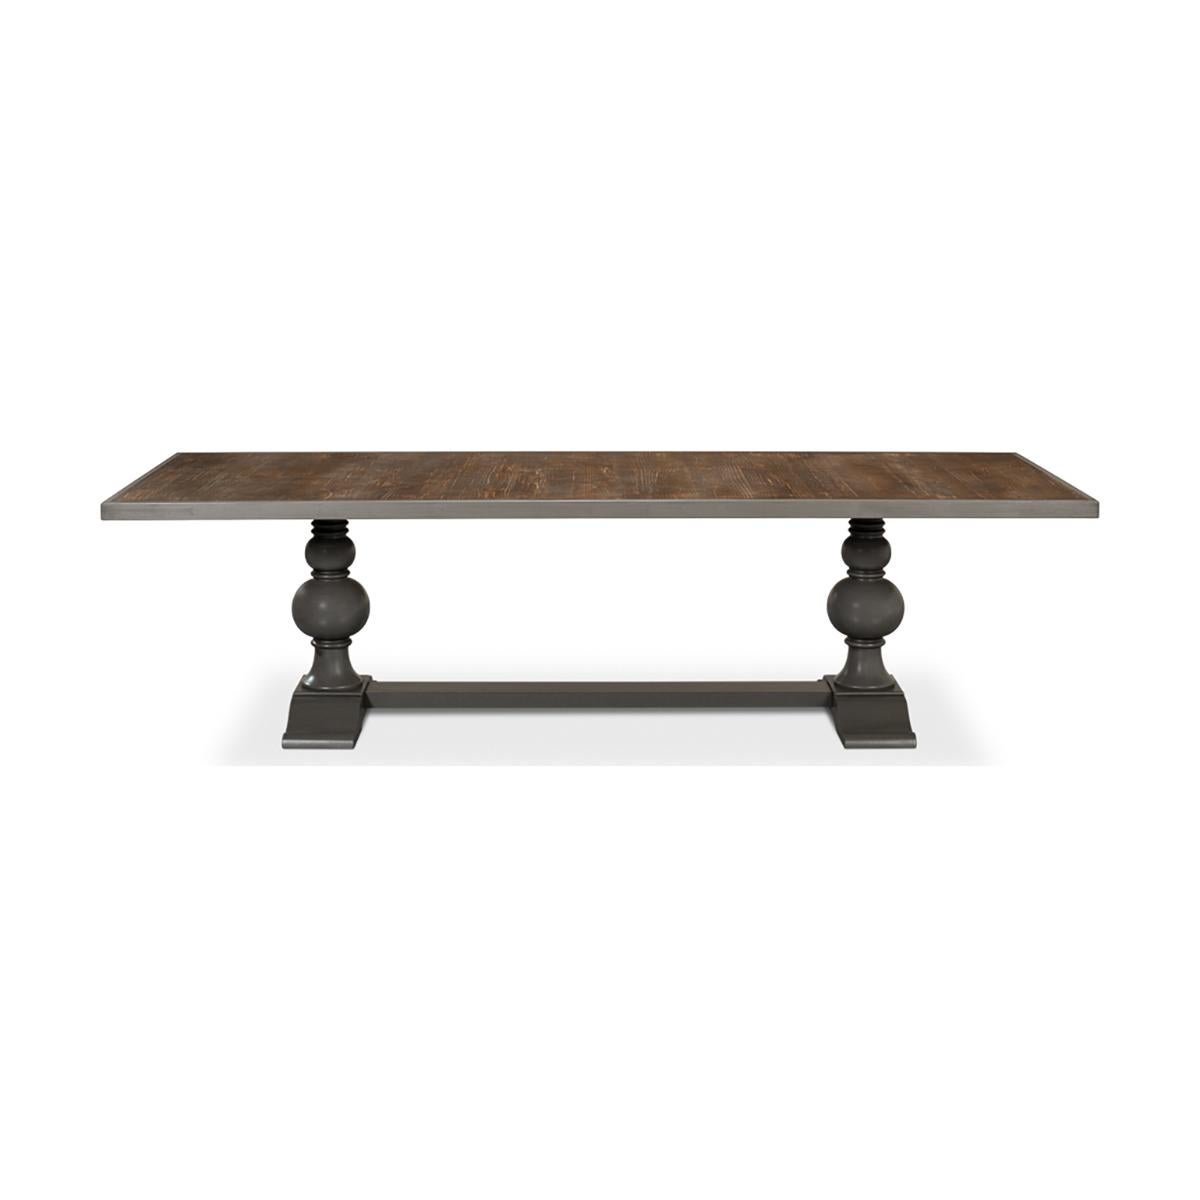 Dining Table with an inlaid reclaimed wood top that adds finesse to your dining area. Supported by a turned baluster double pedestal base, this table marries classic charm with modern style. The gray painted finish completes the look, creating a